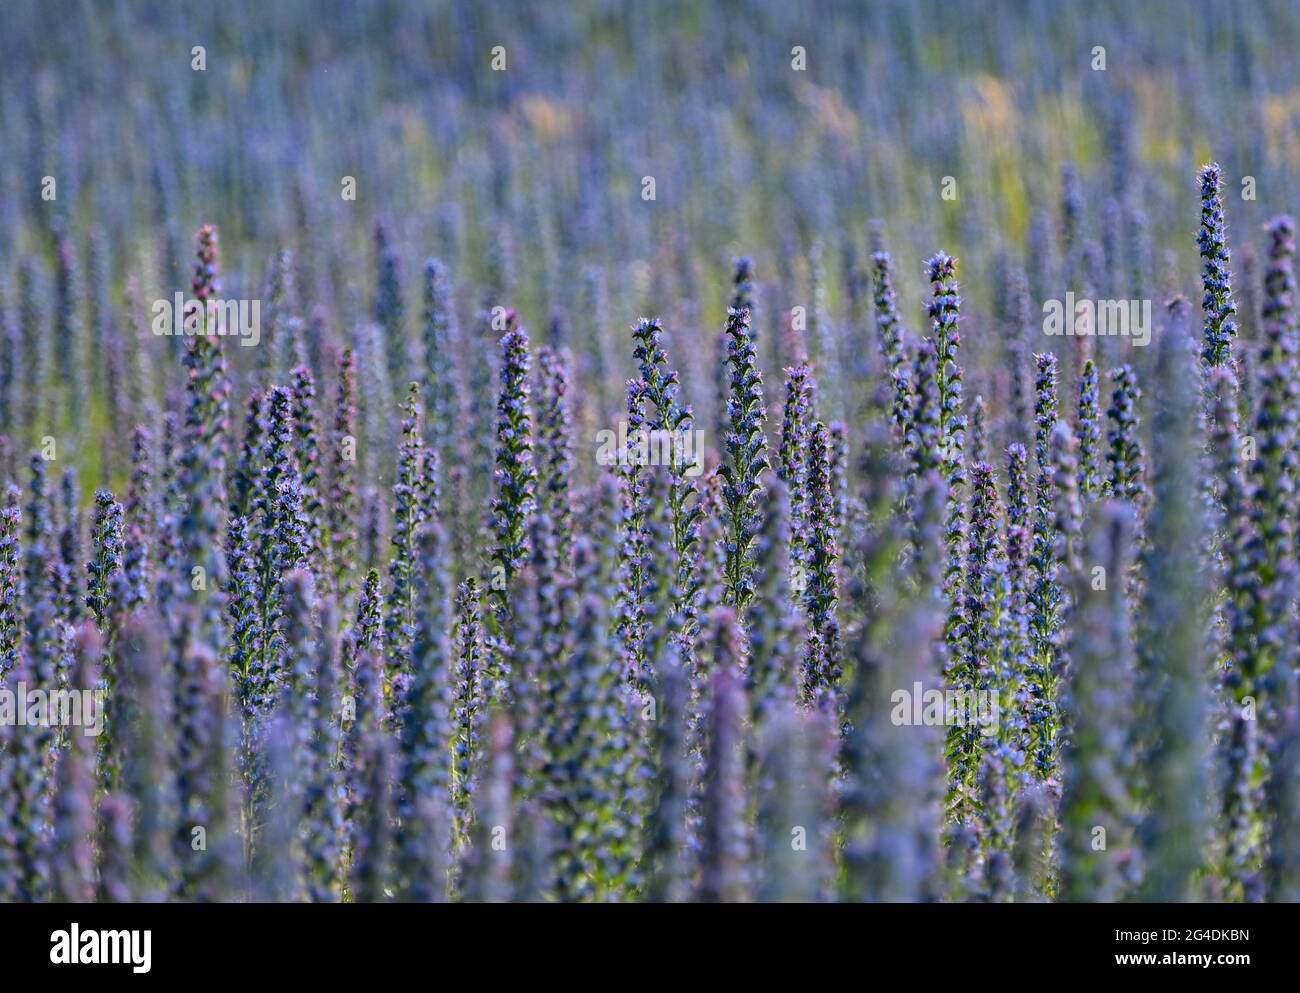 Dubrow, Germany. 21st June, 2021. The common viper's bugloss (Echium vulgare) blooms in large numbers in a meadow. The plant species from the genus of viper's bugloss (Echium) is popularly called 'Blue Henry'. The flowers change colour from red to blue. Credit: Patrick Pleul/dpa-Zentralbild/ZB/dpa/Alamy Live News Stock Photo